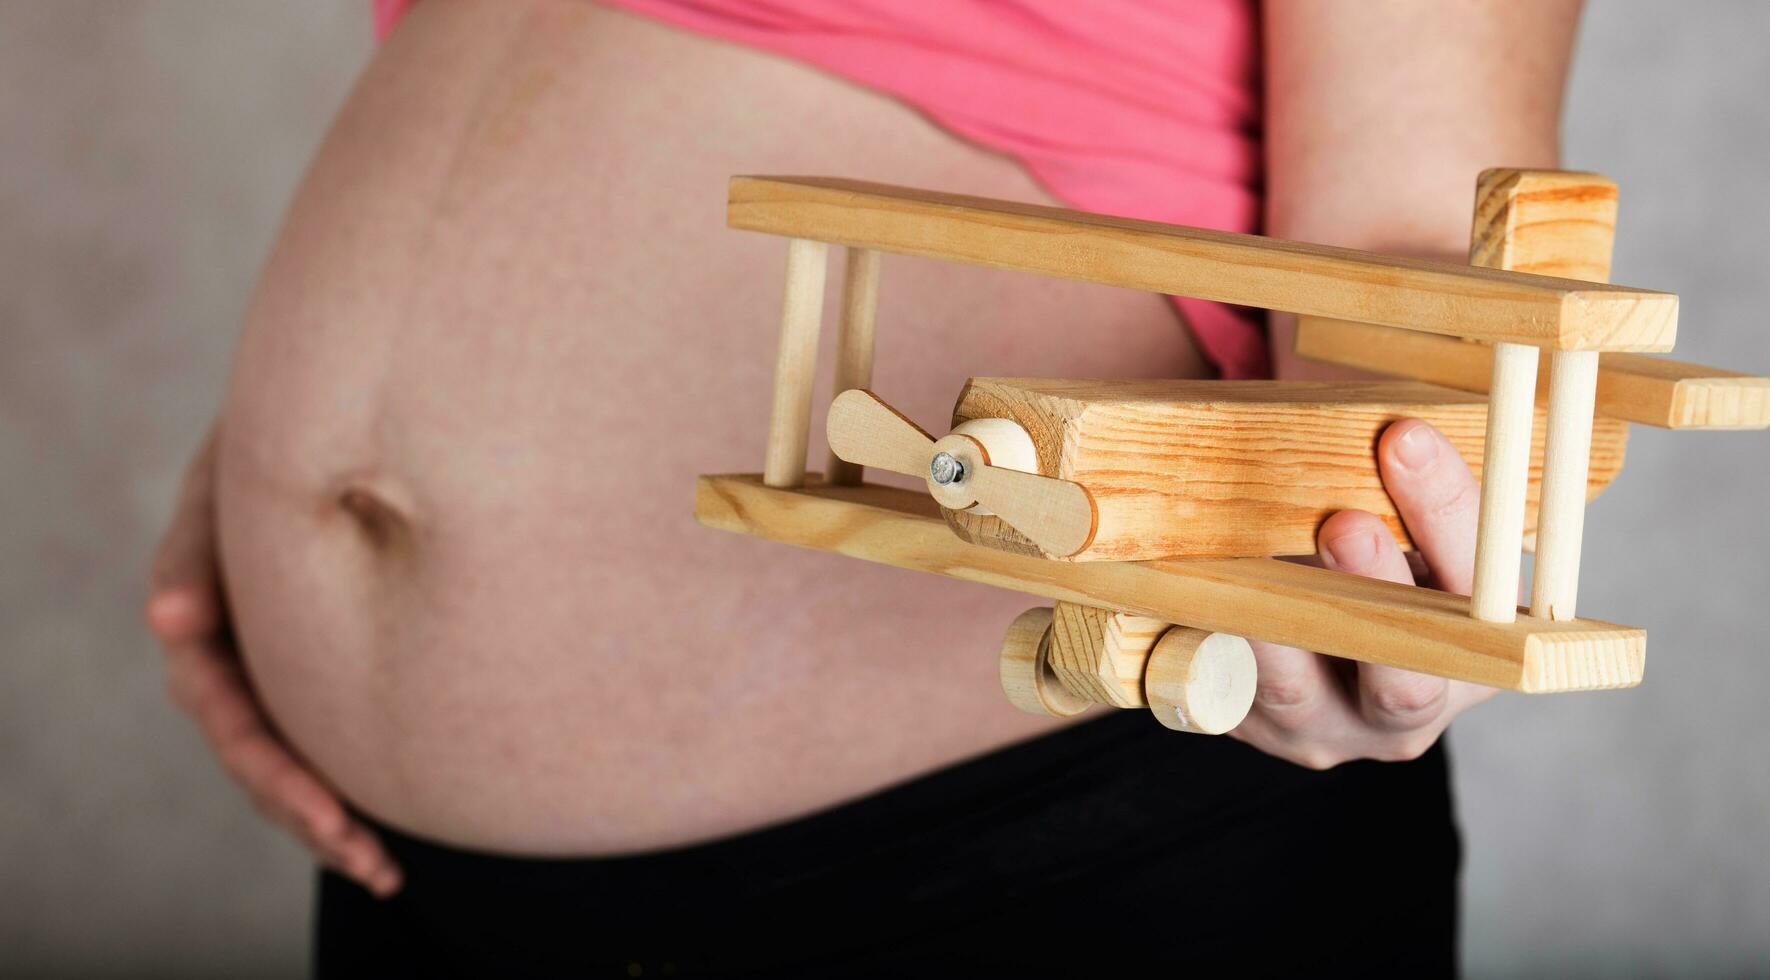 Young pregnant woman keeps wooden made airplane. photo